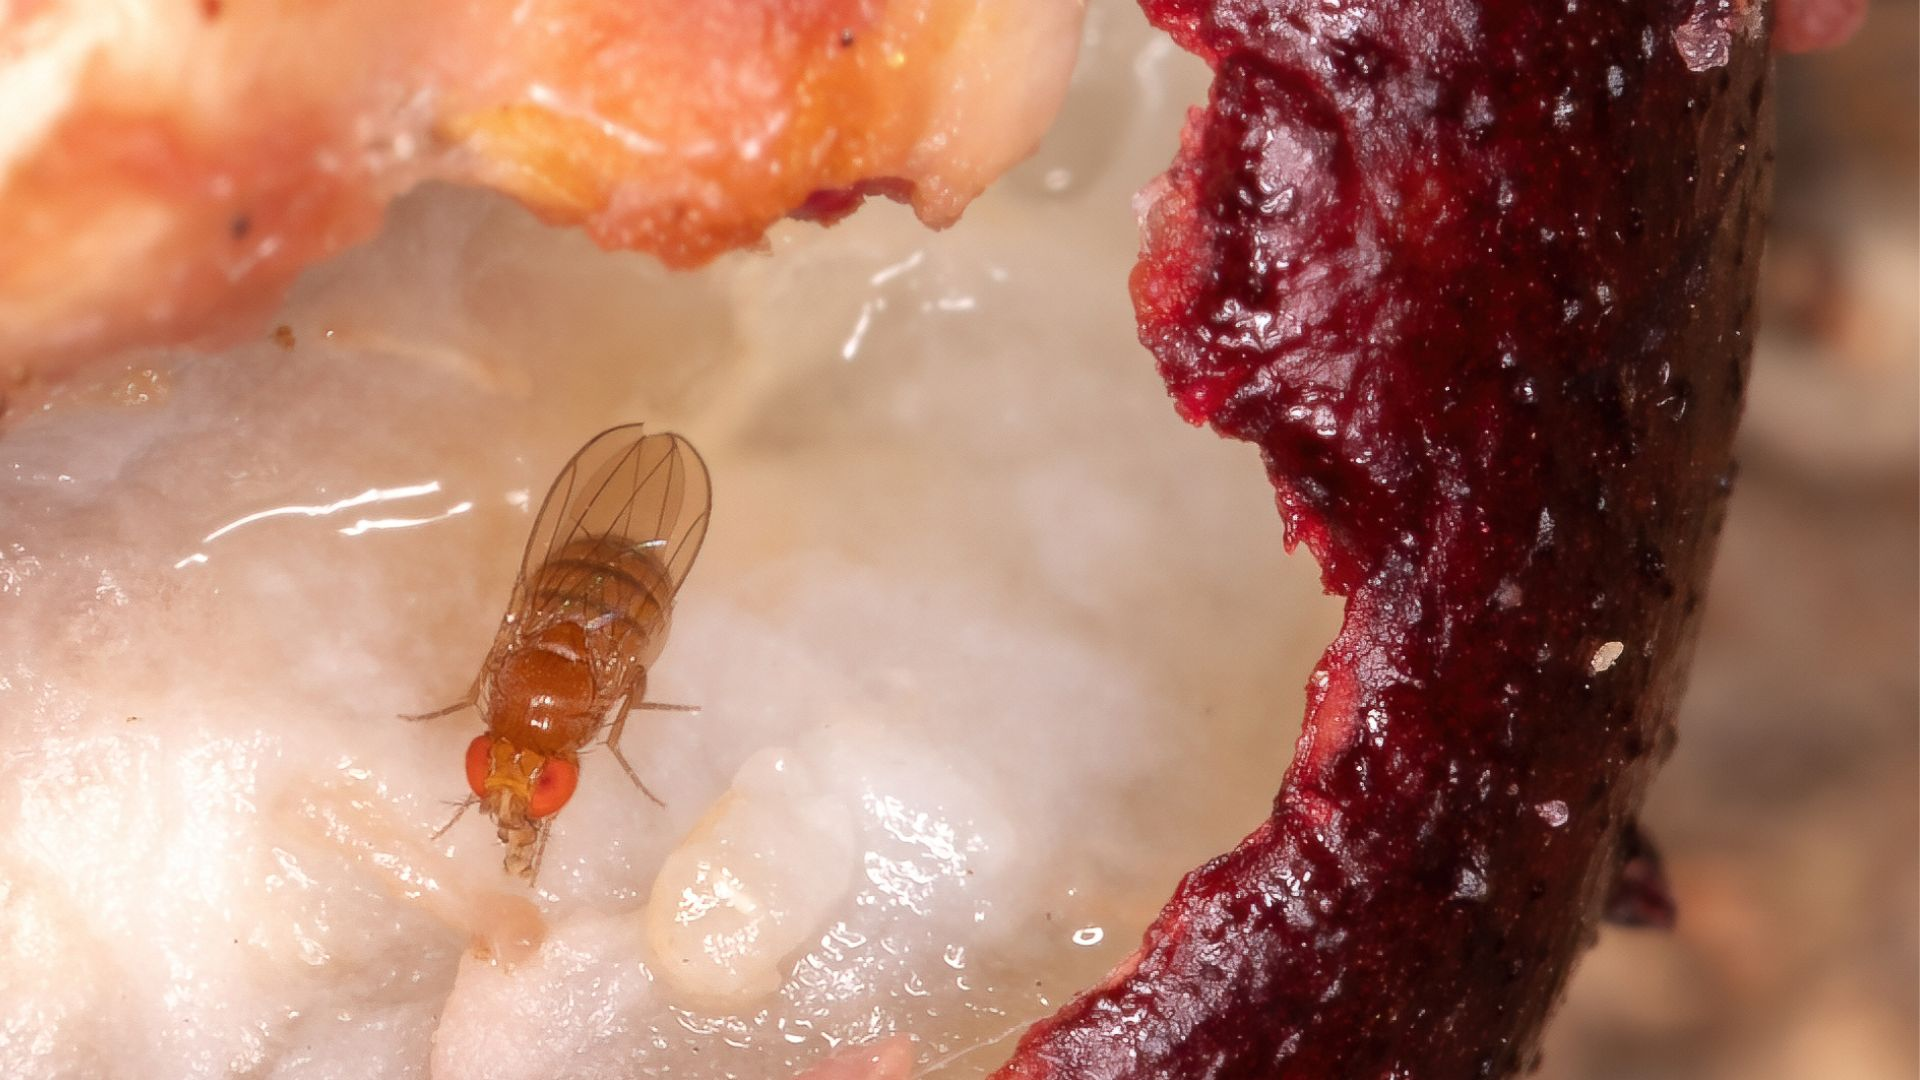 An image of a fruit fly eating rotten fruit.